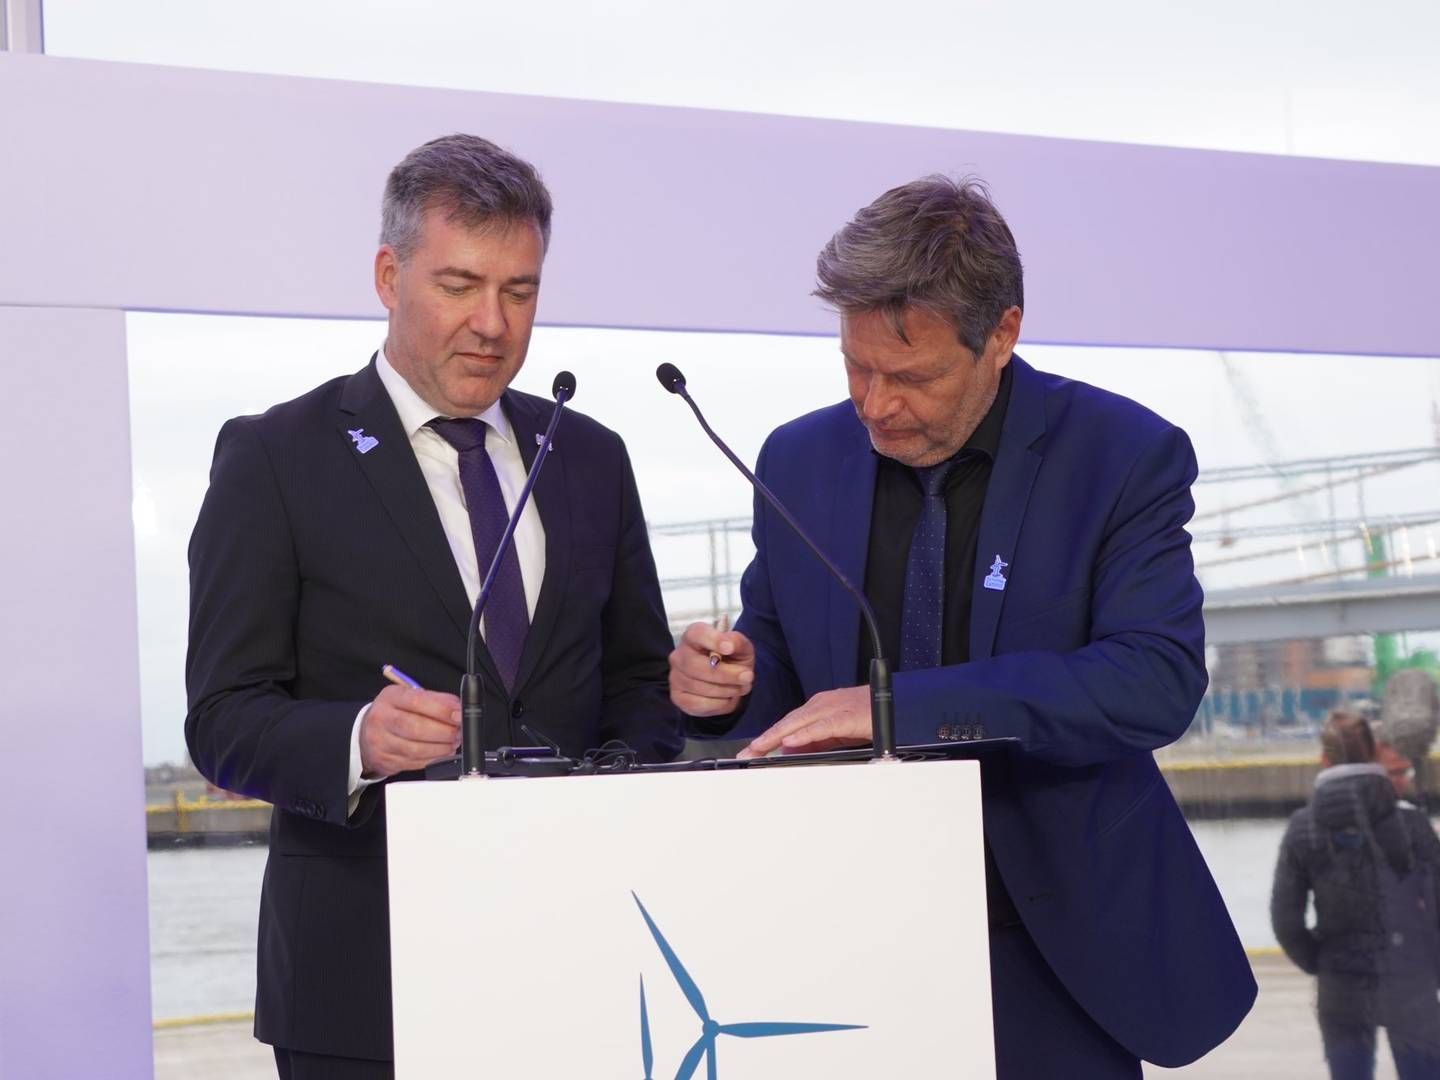 This is not the first agreement that the Danish energy minister, Lars Aagaard (left), has signed with neighboring countries. Here he signs the CCUS agreement with his German colleague, Robert Habeck, last April. | Photo: Kefm